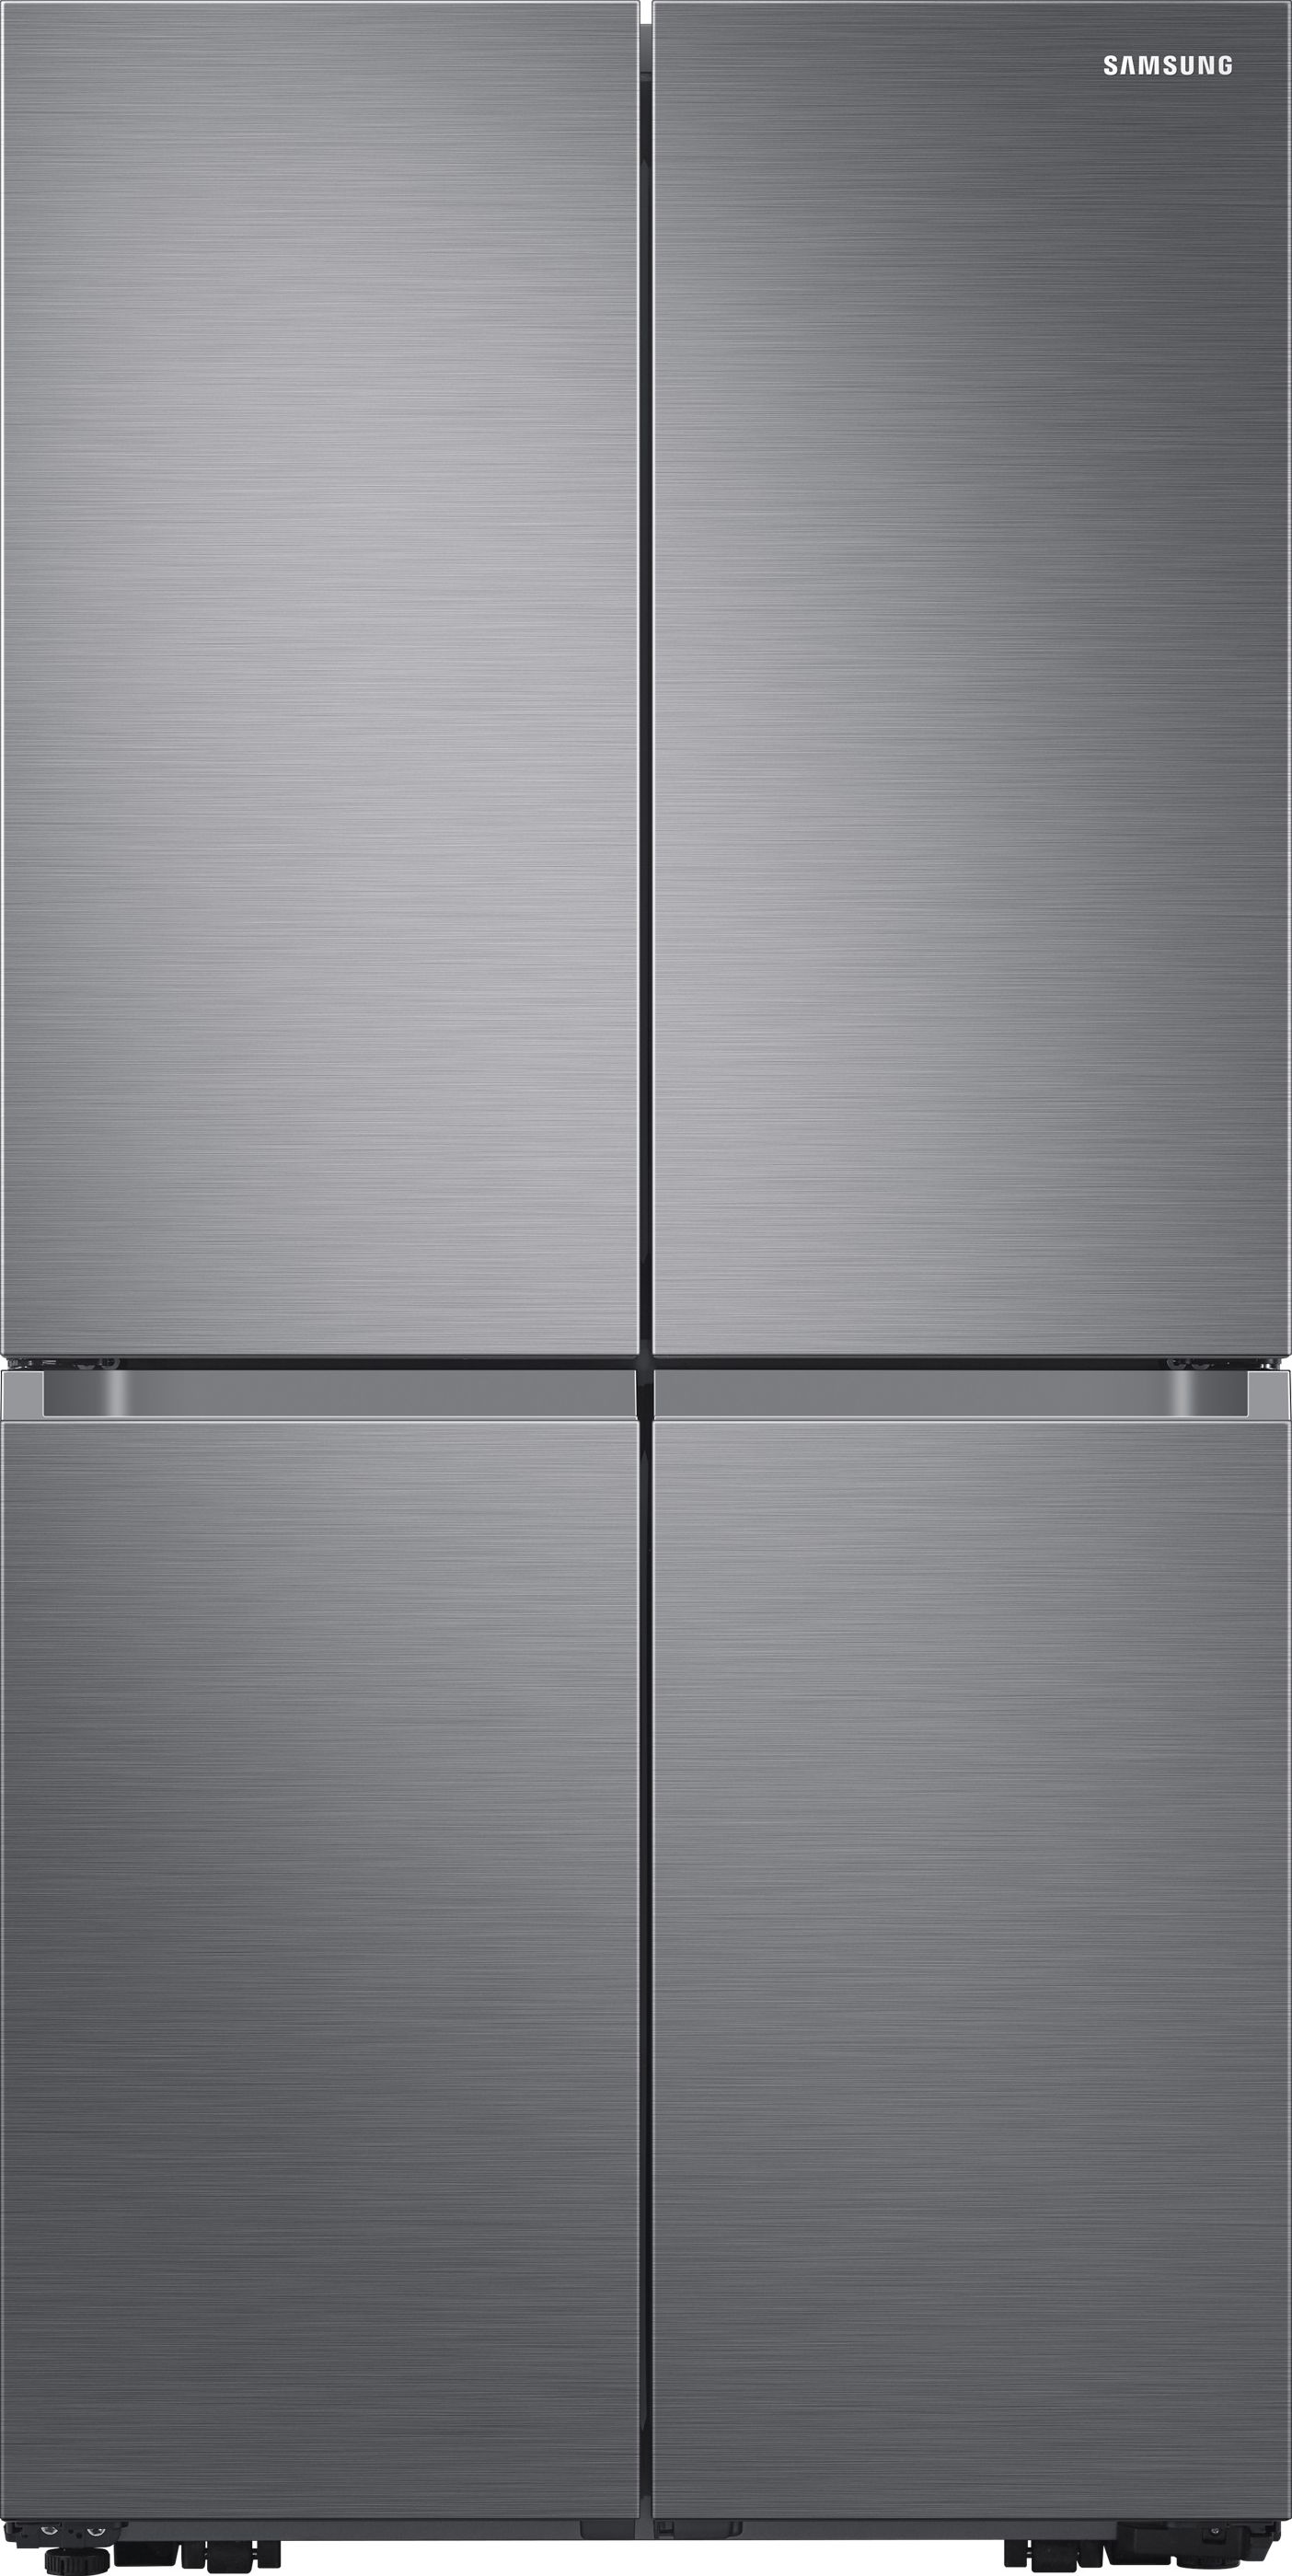 Samsung Series 9 RF65A967ES9 Wifi Connected Total No Frost American Fridge Freezer - Matte Stainless Steel - E Rated, Stainless Steel